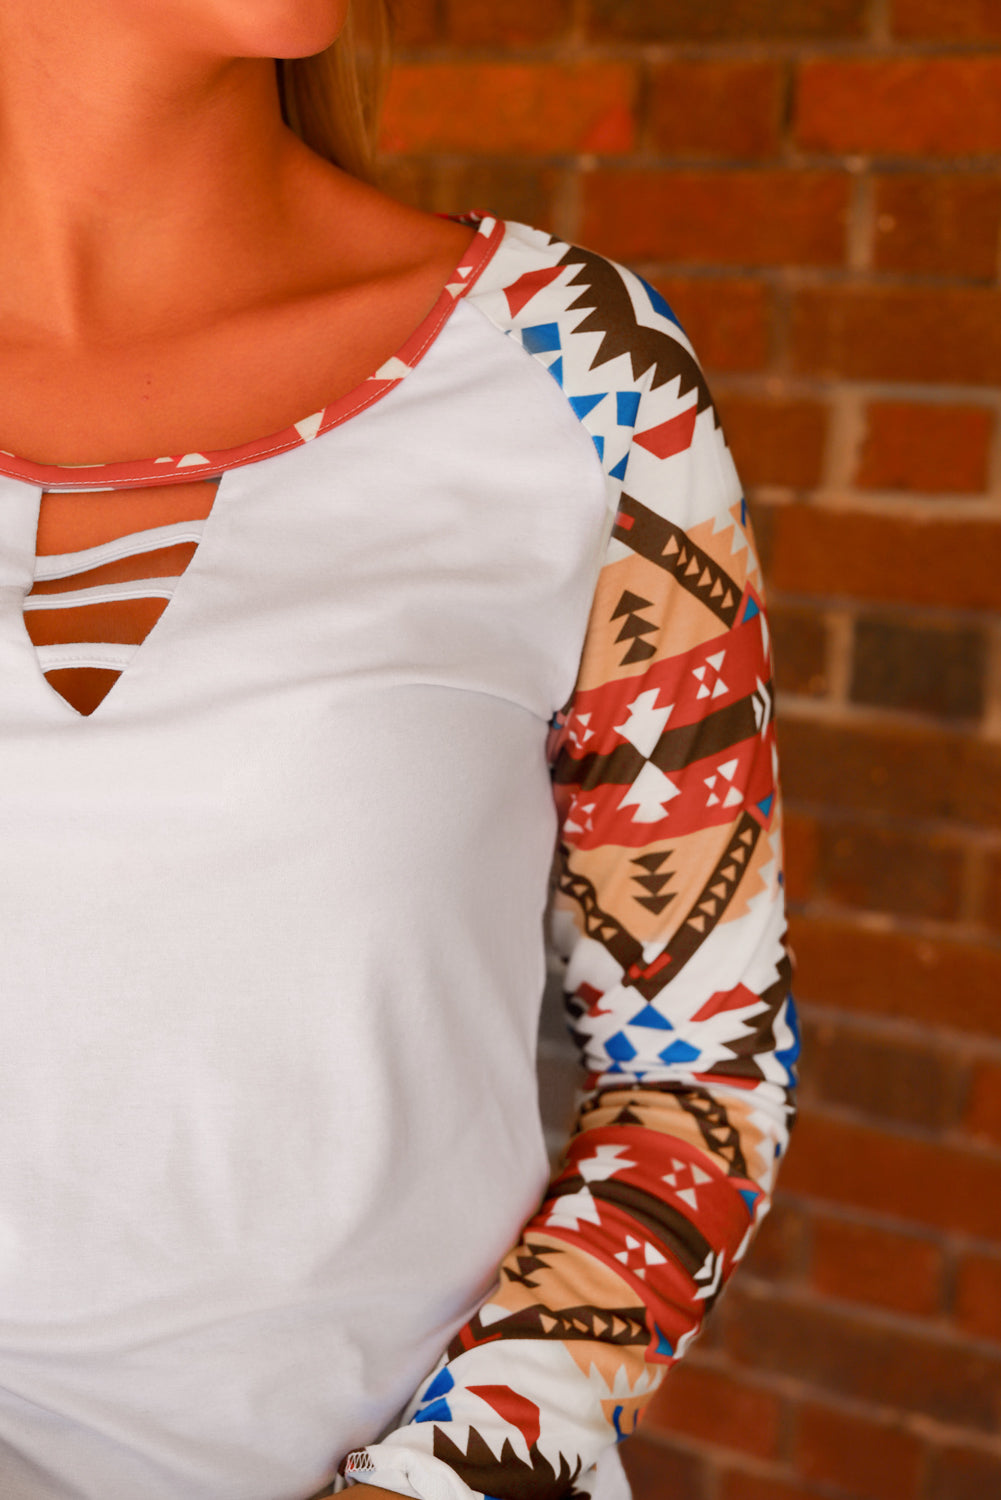 Multicolor Aztec Long Sleeve Ladder Strappy Cutout Top